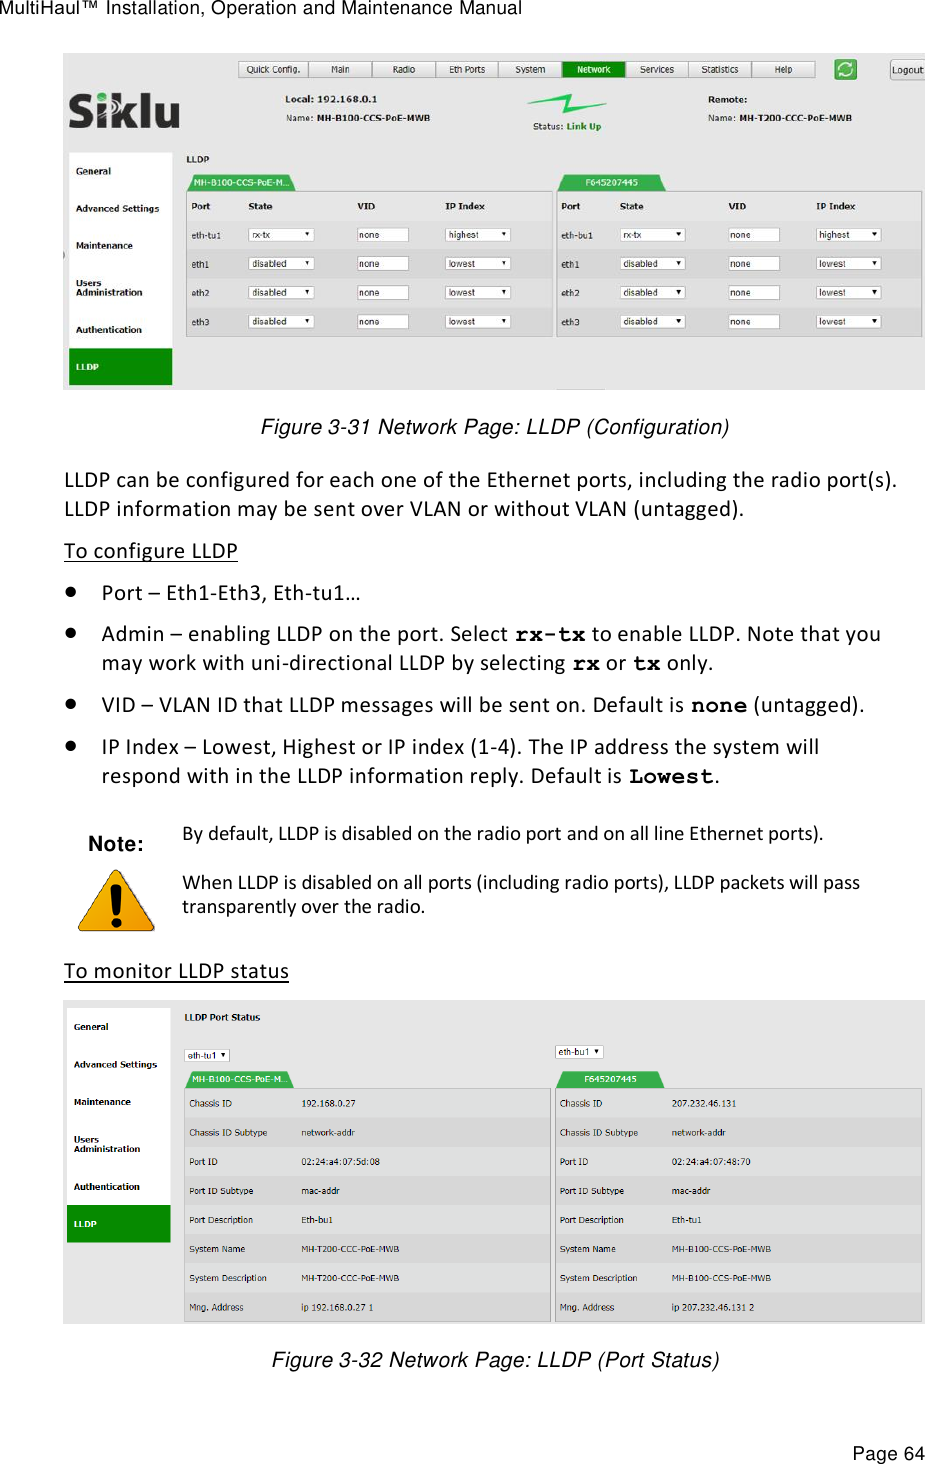 MultiHaul™ Installation, Operation and Maintenance Manual Page 64  Figure 3-31 Network Page: LLDP (Configuration) LLDP can be configured for each one of the Ethernet ports, including the radio port(s). LLDP information may be sent over VLAN or without VLAN (untagged). To configure LLDP  Port – Eth1-Eth3, Eth-tu1…  Admin – enabling LLDP on the port. Select rx-tx to enable LLDP. Note that you may work with uni-directional LLDP by selecting rx or tx only.   VID – VLAN ID that LLDP messages will be sent on. Default is none (untagged).  IP Index – Lowest, Highest or IP index (1-4). The IP address the system will respond with in the LLDP information reply. Default is Lowest. To monitor LLDP status  Figure 3-32 Network Page: LLDP (Port Status) Note:  By default, LLDP is disabled on the radio port and on all line Ethernet ports). When LLDP is disabled on all ports (including radio ports), LLDP packets will pass transparently over the radio. 